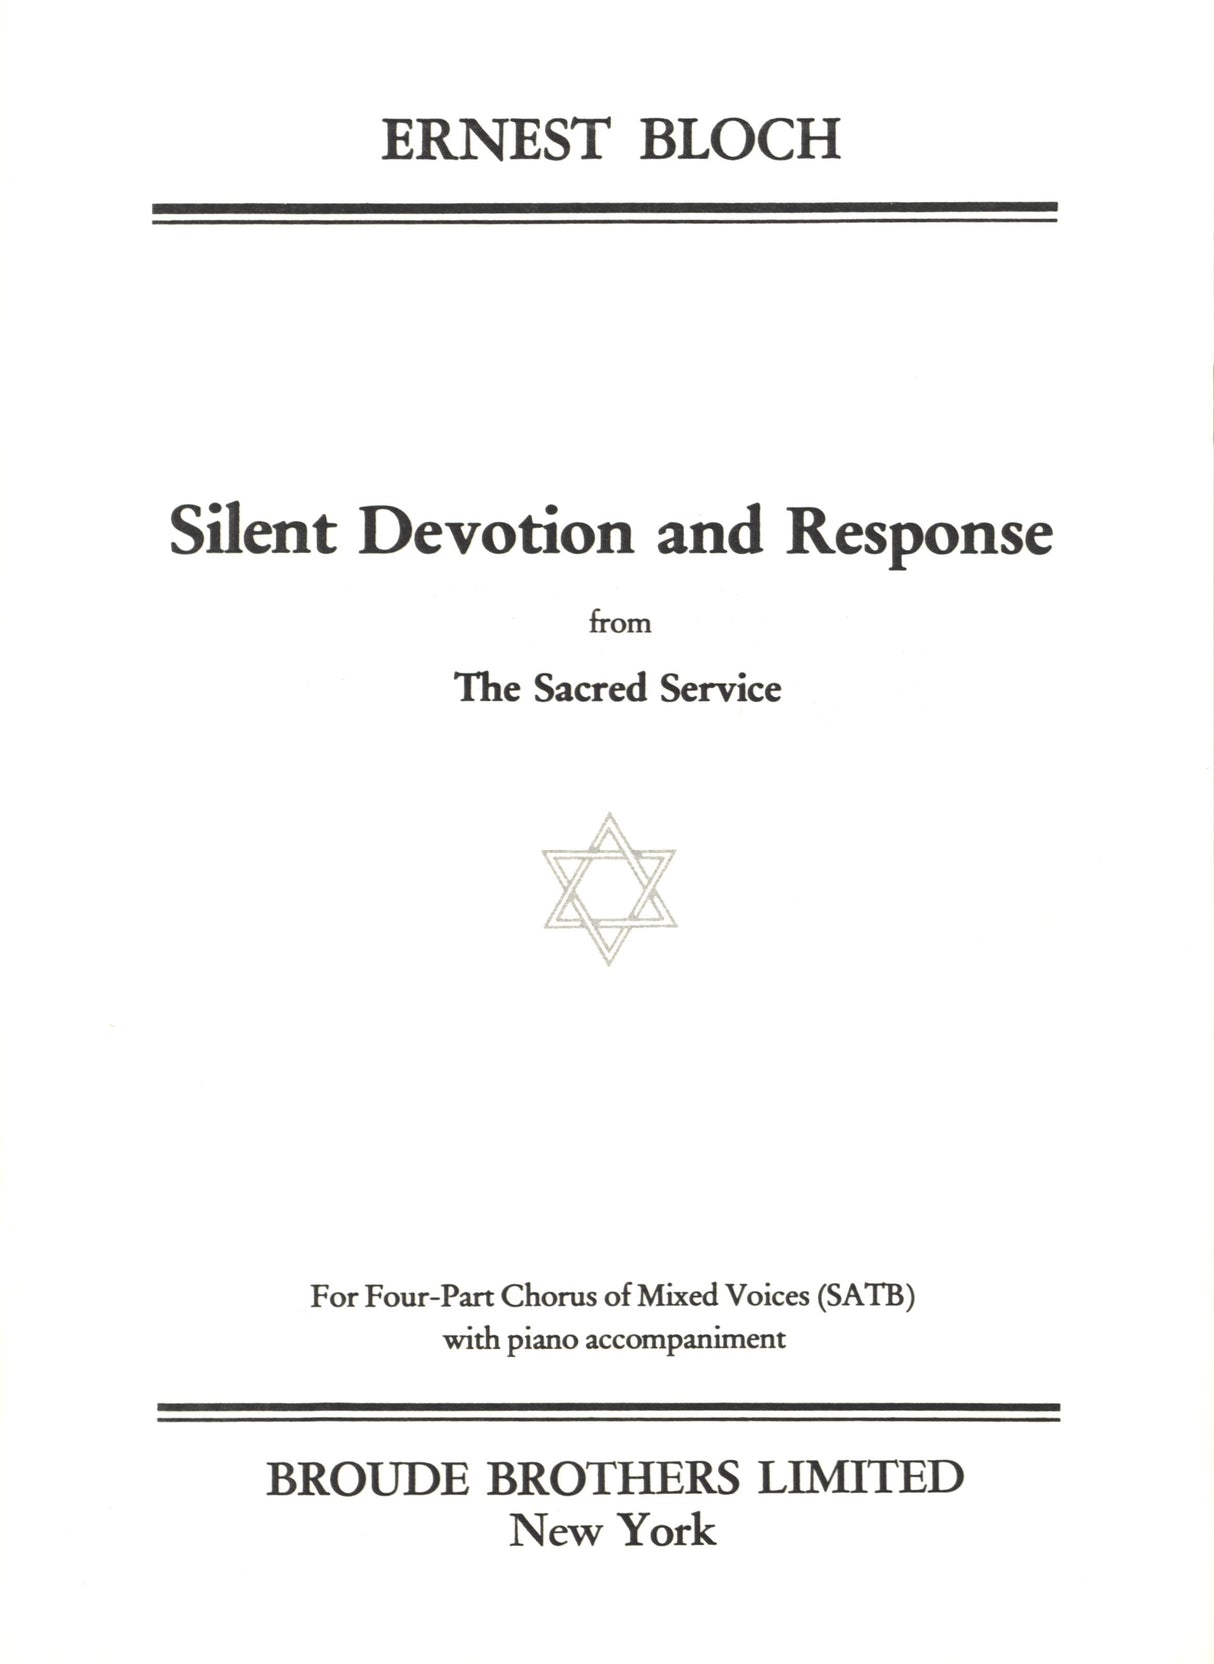 Bloch: Silent Devotion and Response